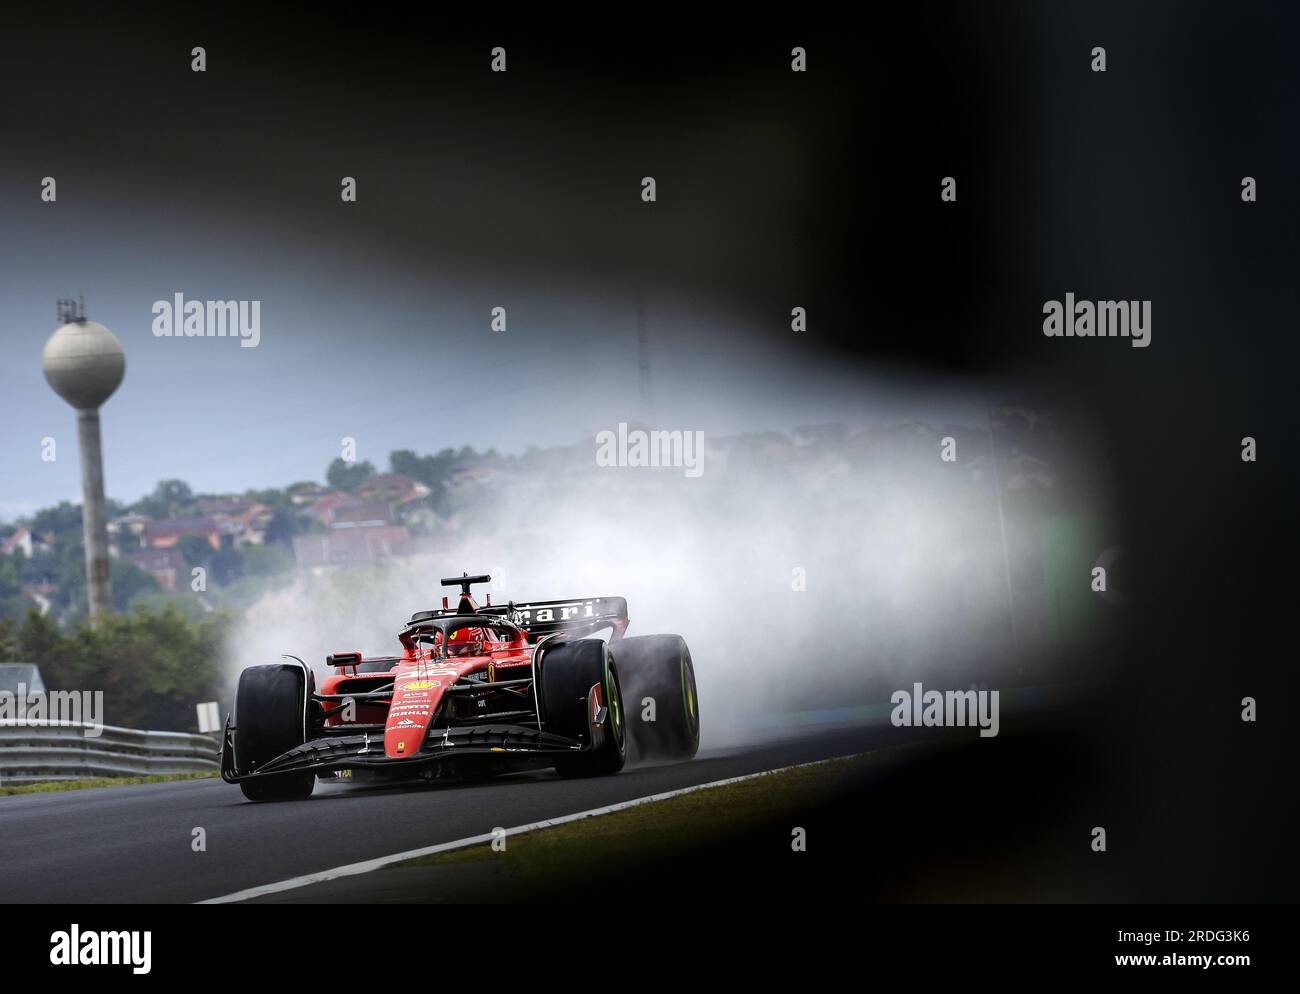 BUDAPEST - 21/07/2023,  Charles Leclerc (Ferrari) in the rain during the 1st free practice on the Hungaroring Circuit in the run-up to the Hungarian Grand Prix. ANP REMKO DE WAAL Stock Photo